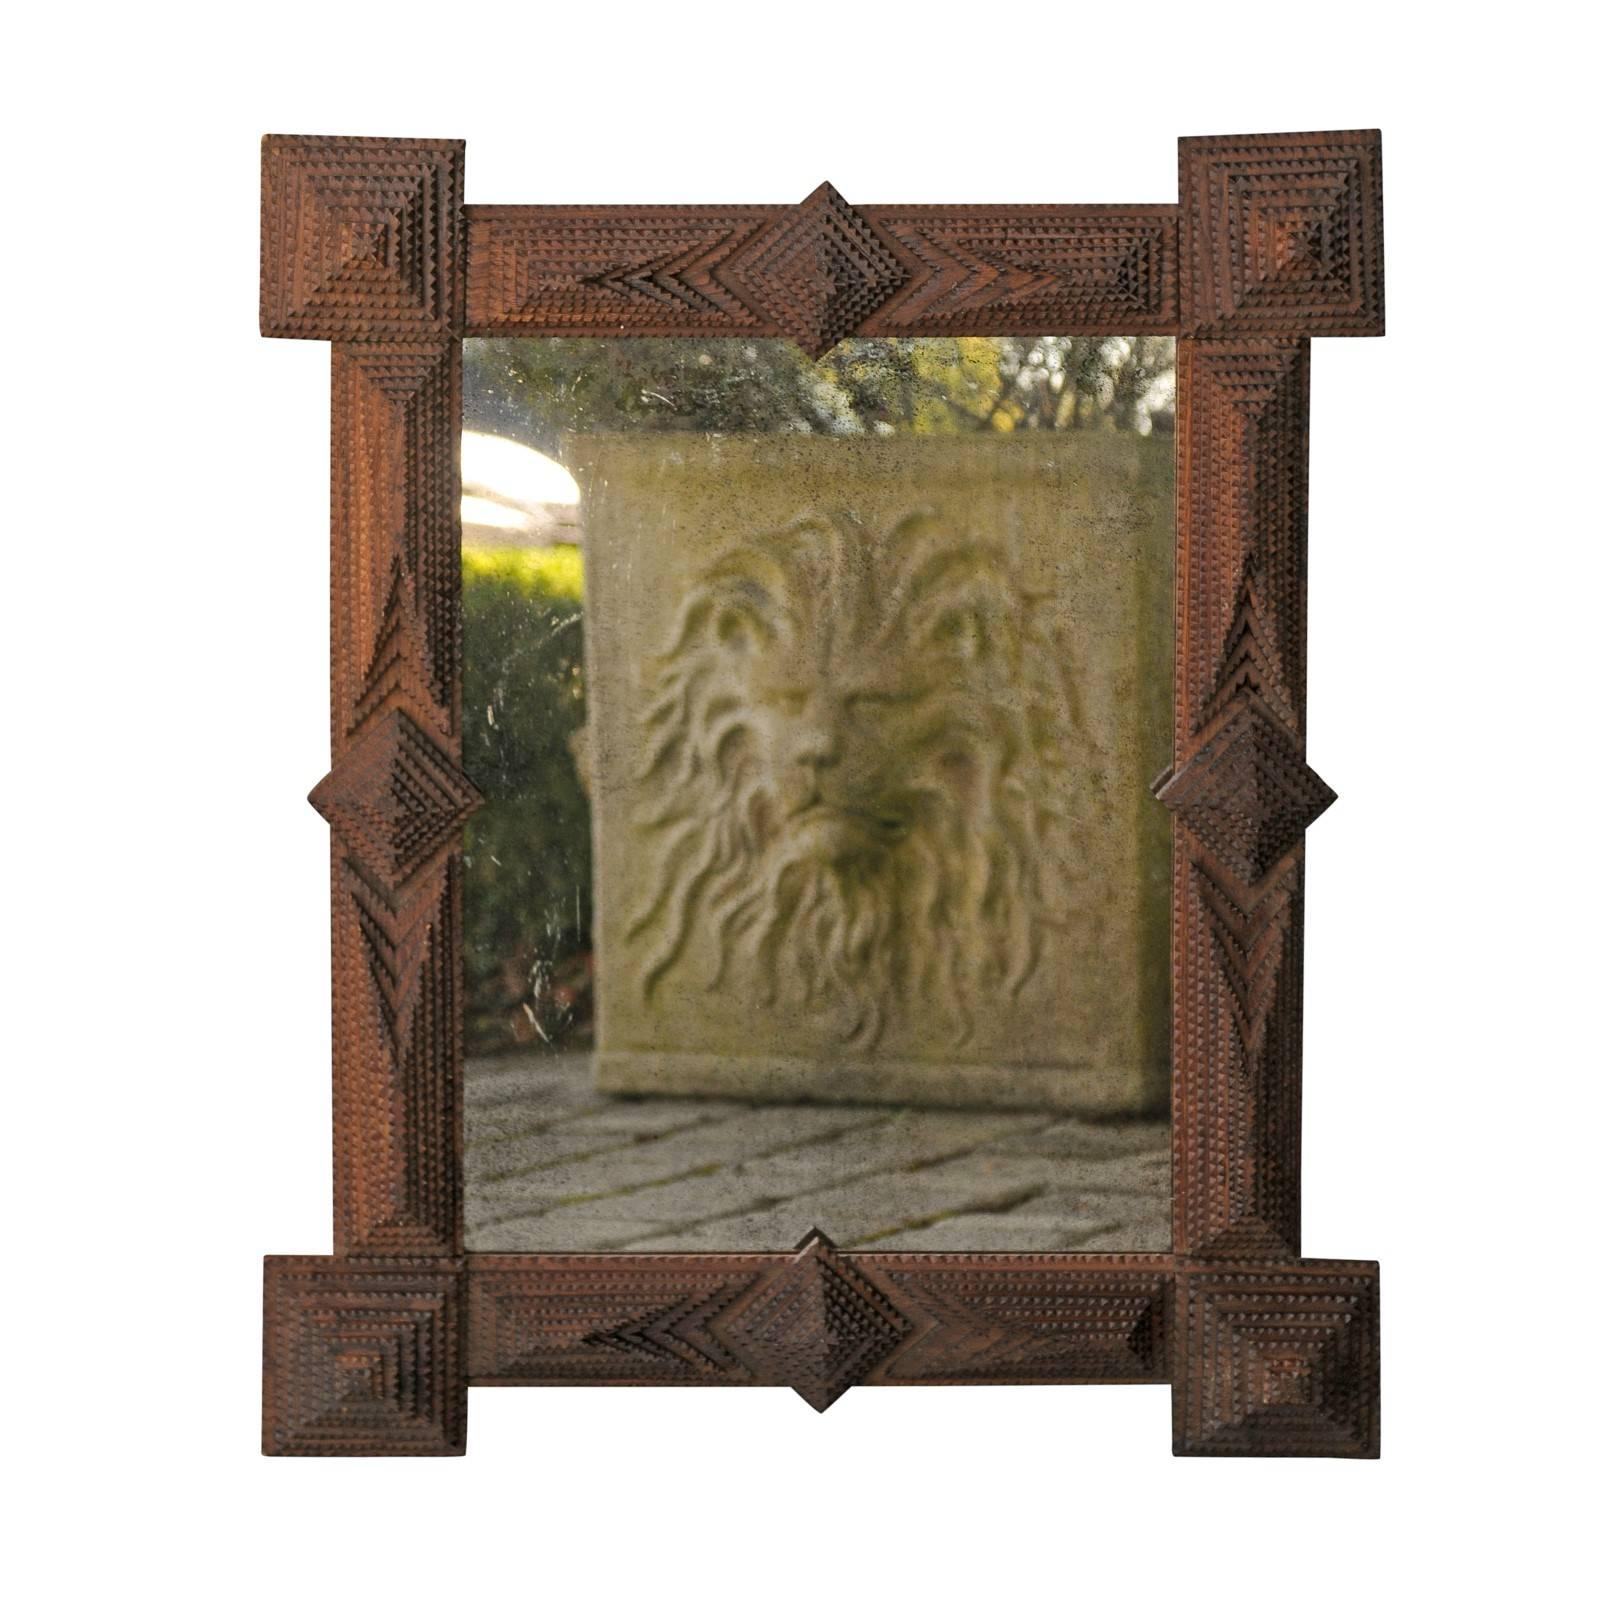 A French Tramp Art mirror with pyramidal motifs from the turn of the century. This French mirror was hand-carved in the early 1900s in the manner typical of the Tramp Art style. Consisting of a rather linear frame, the mirror features a layered